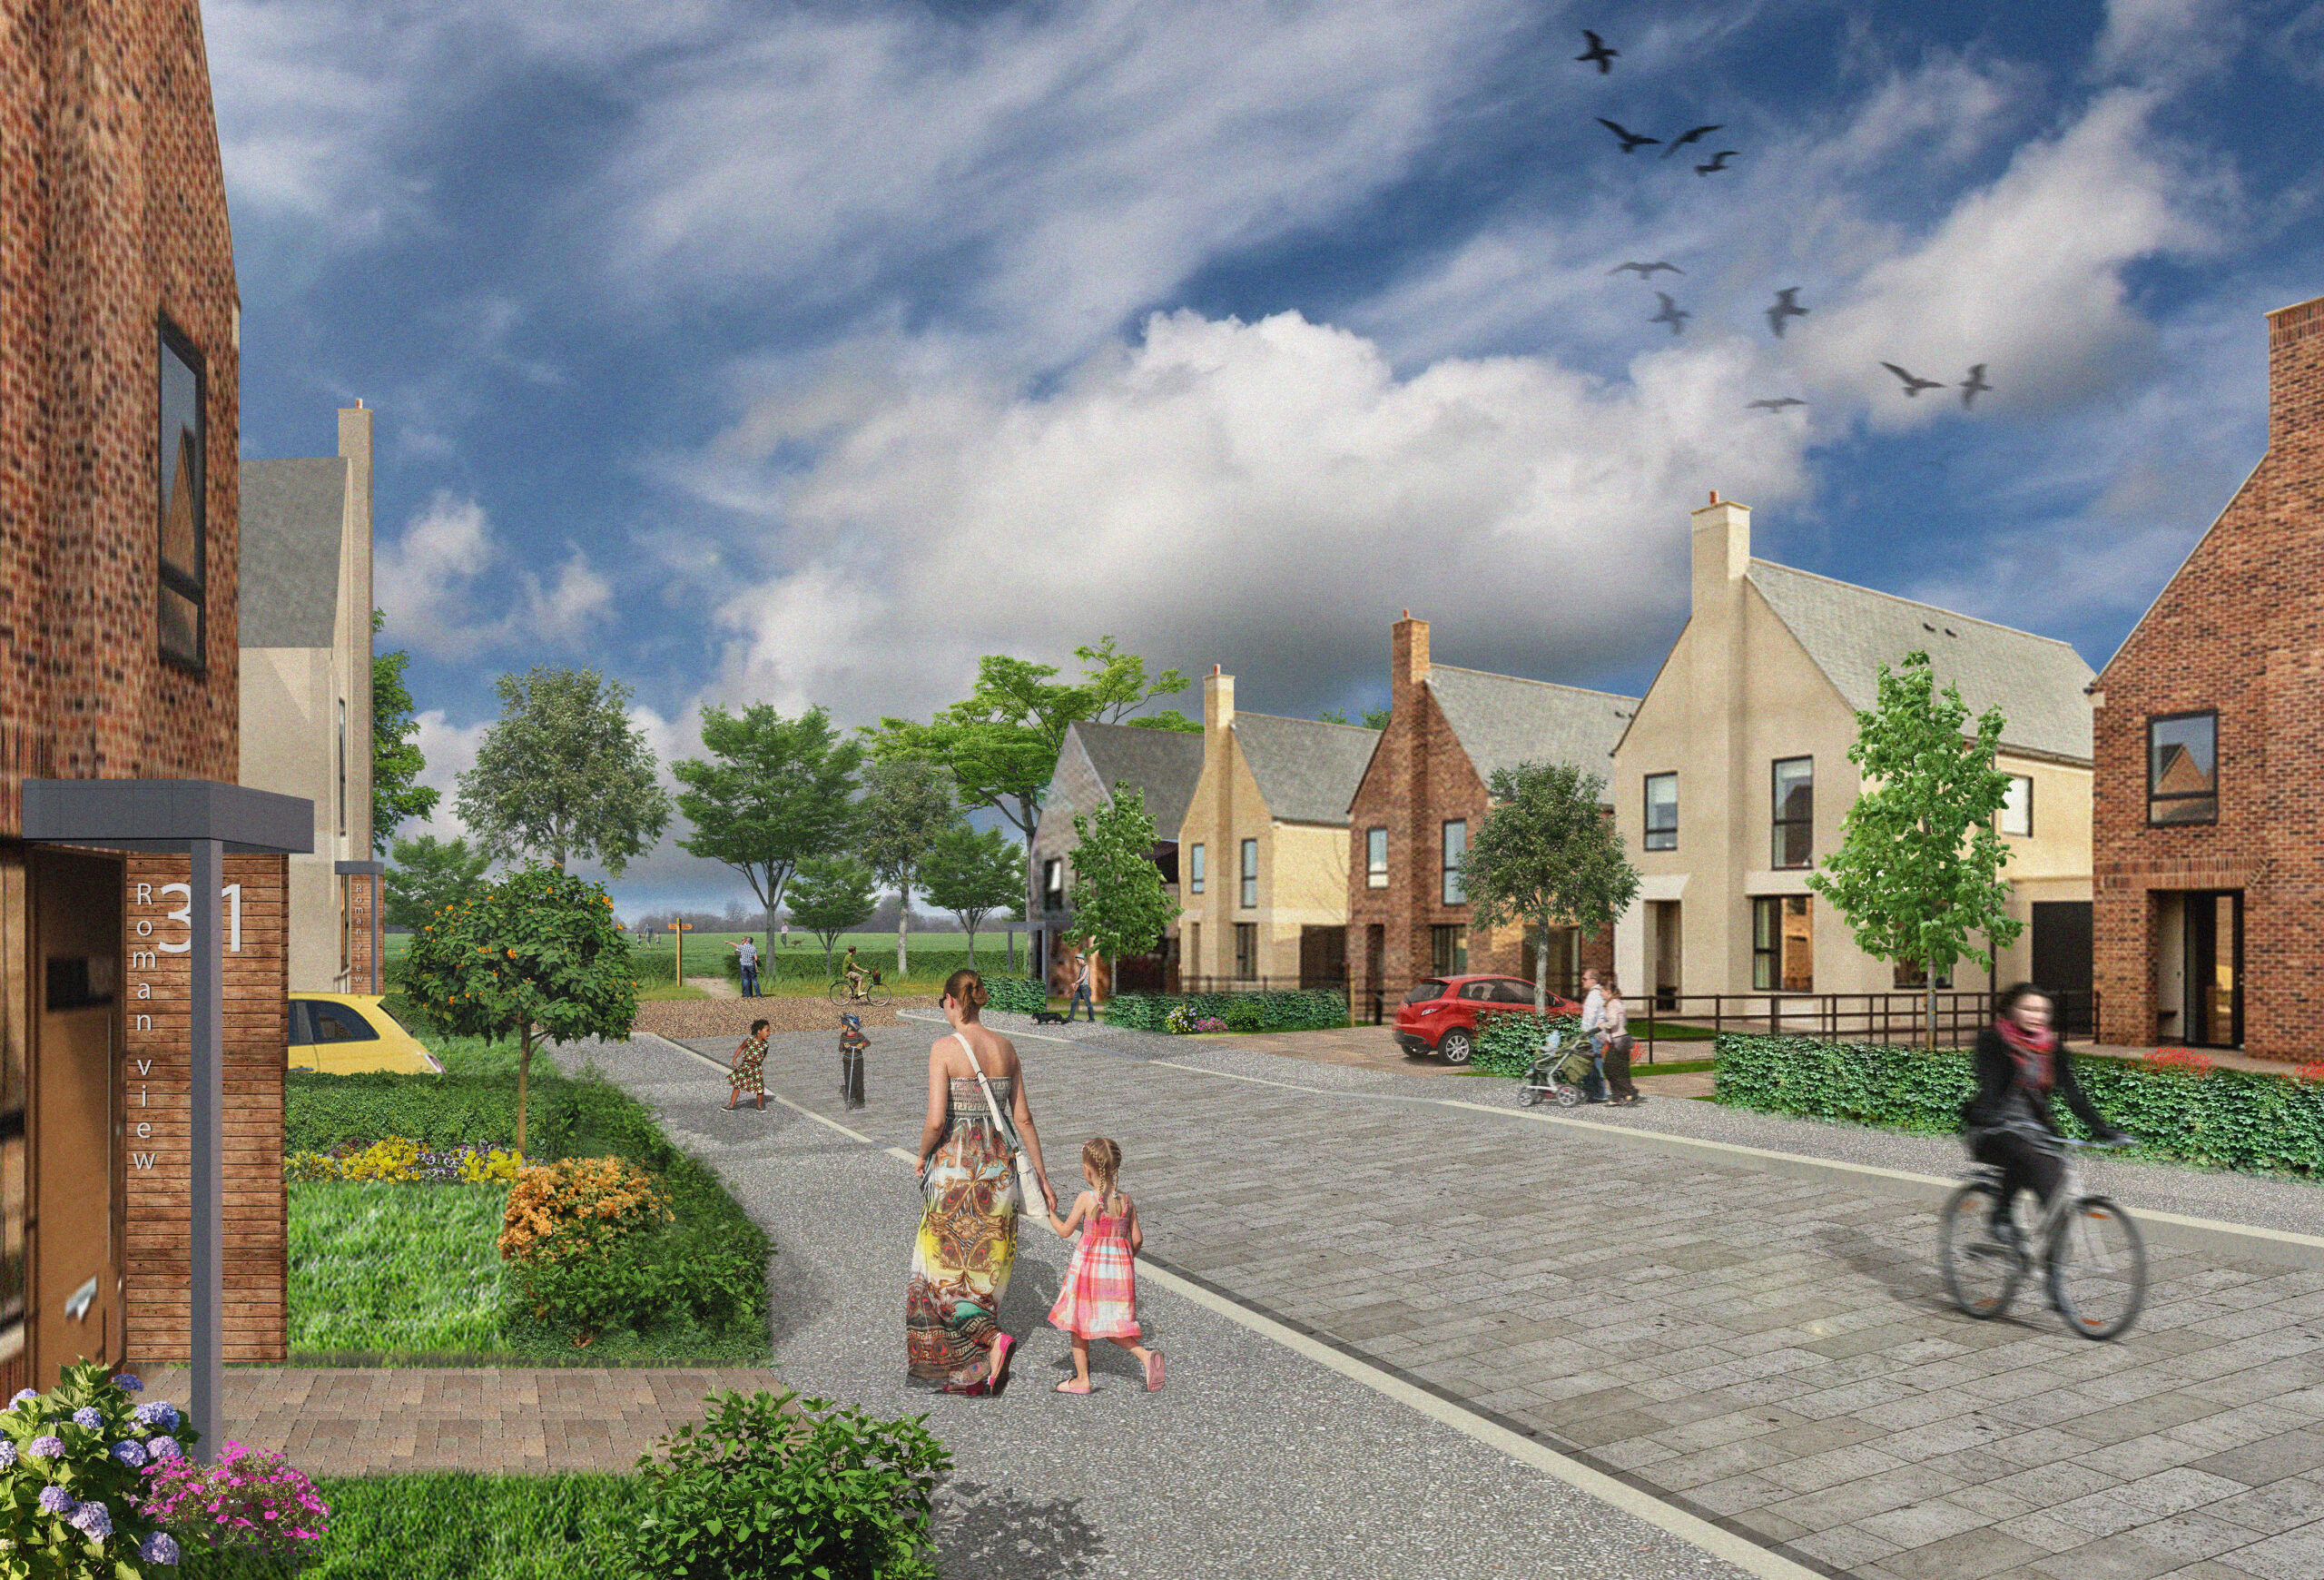 An artist’s impression of the view through the development towards the Scheduled Ancient Monument